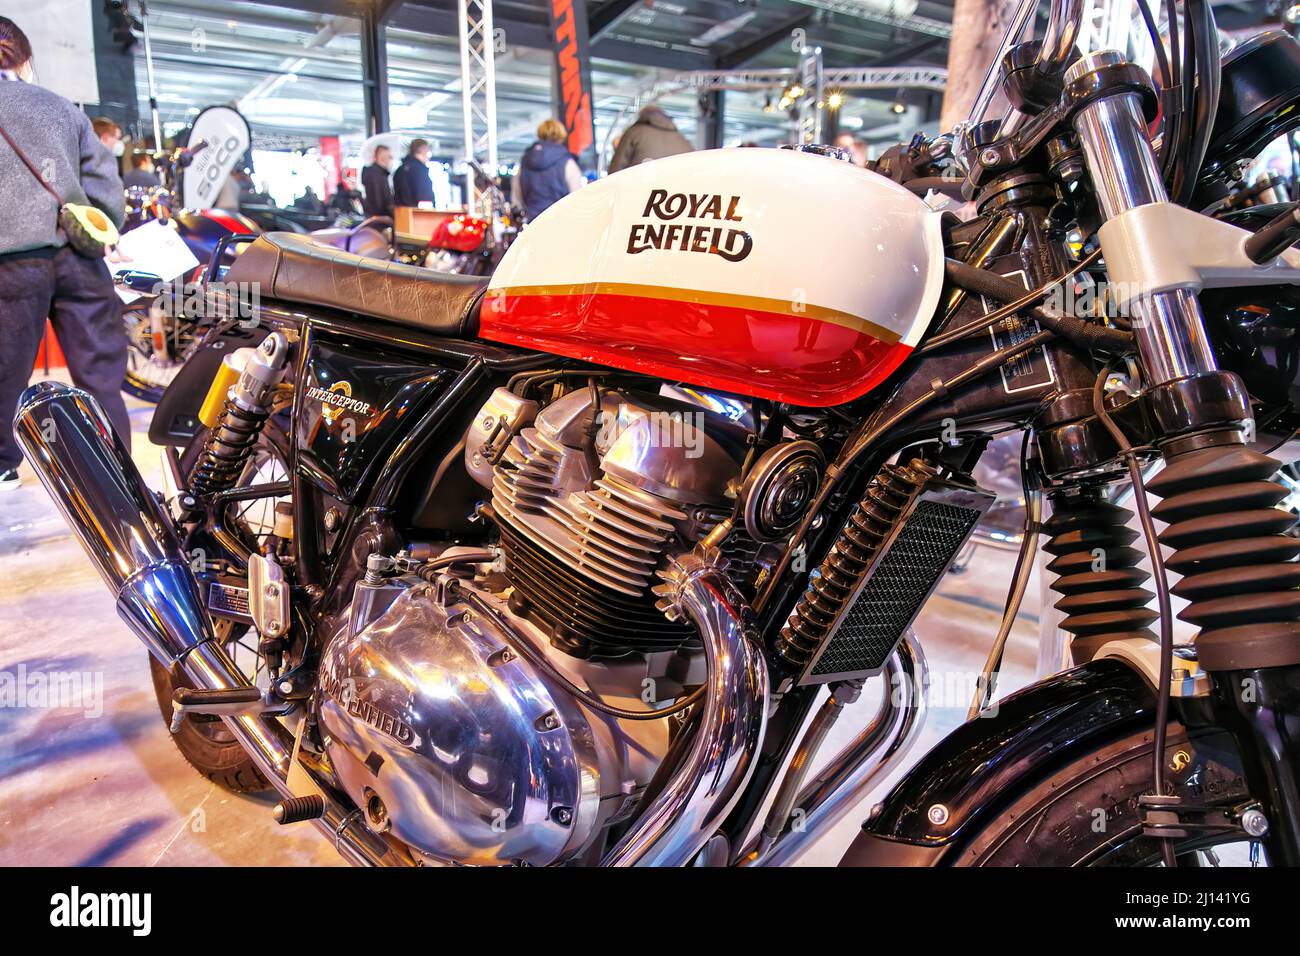 Roayal Enfield motorcycle from India, sturdy powerful classic motorcycle for travel and everyday use in Braunschweig, Germany, March 20, 2022 Stock Photo